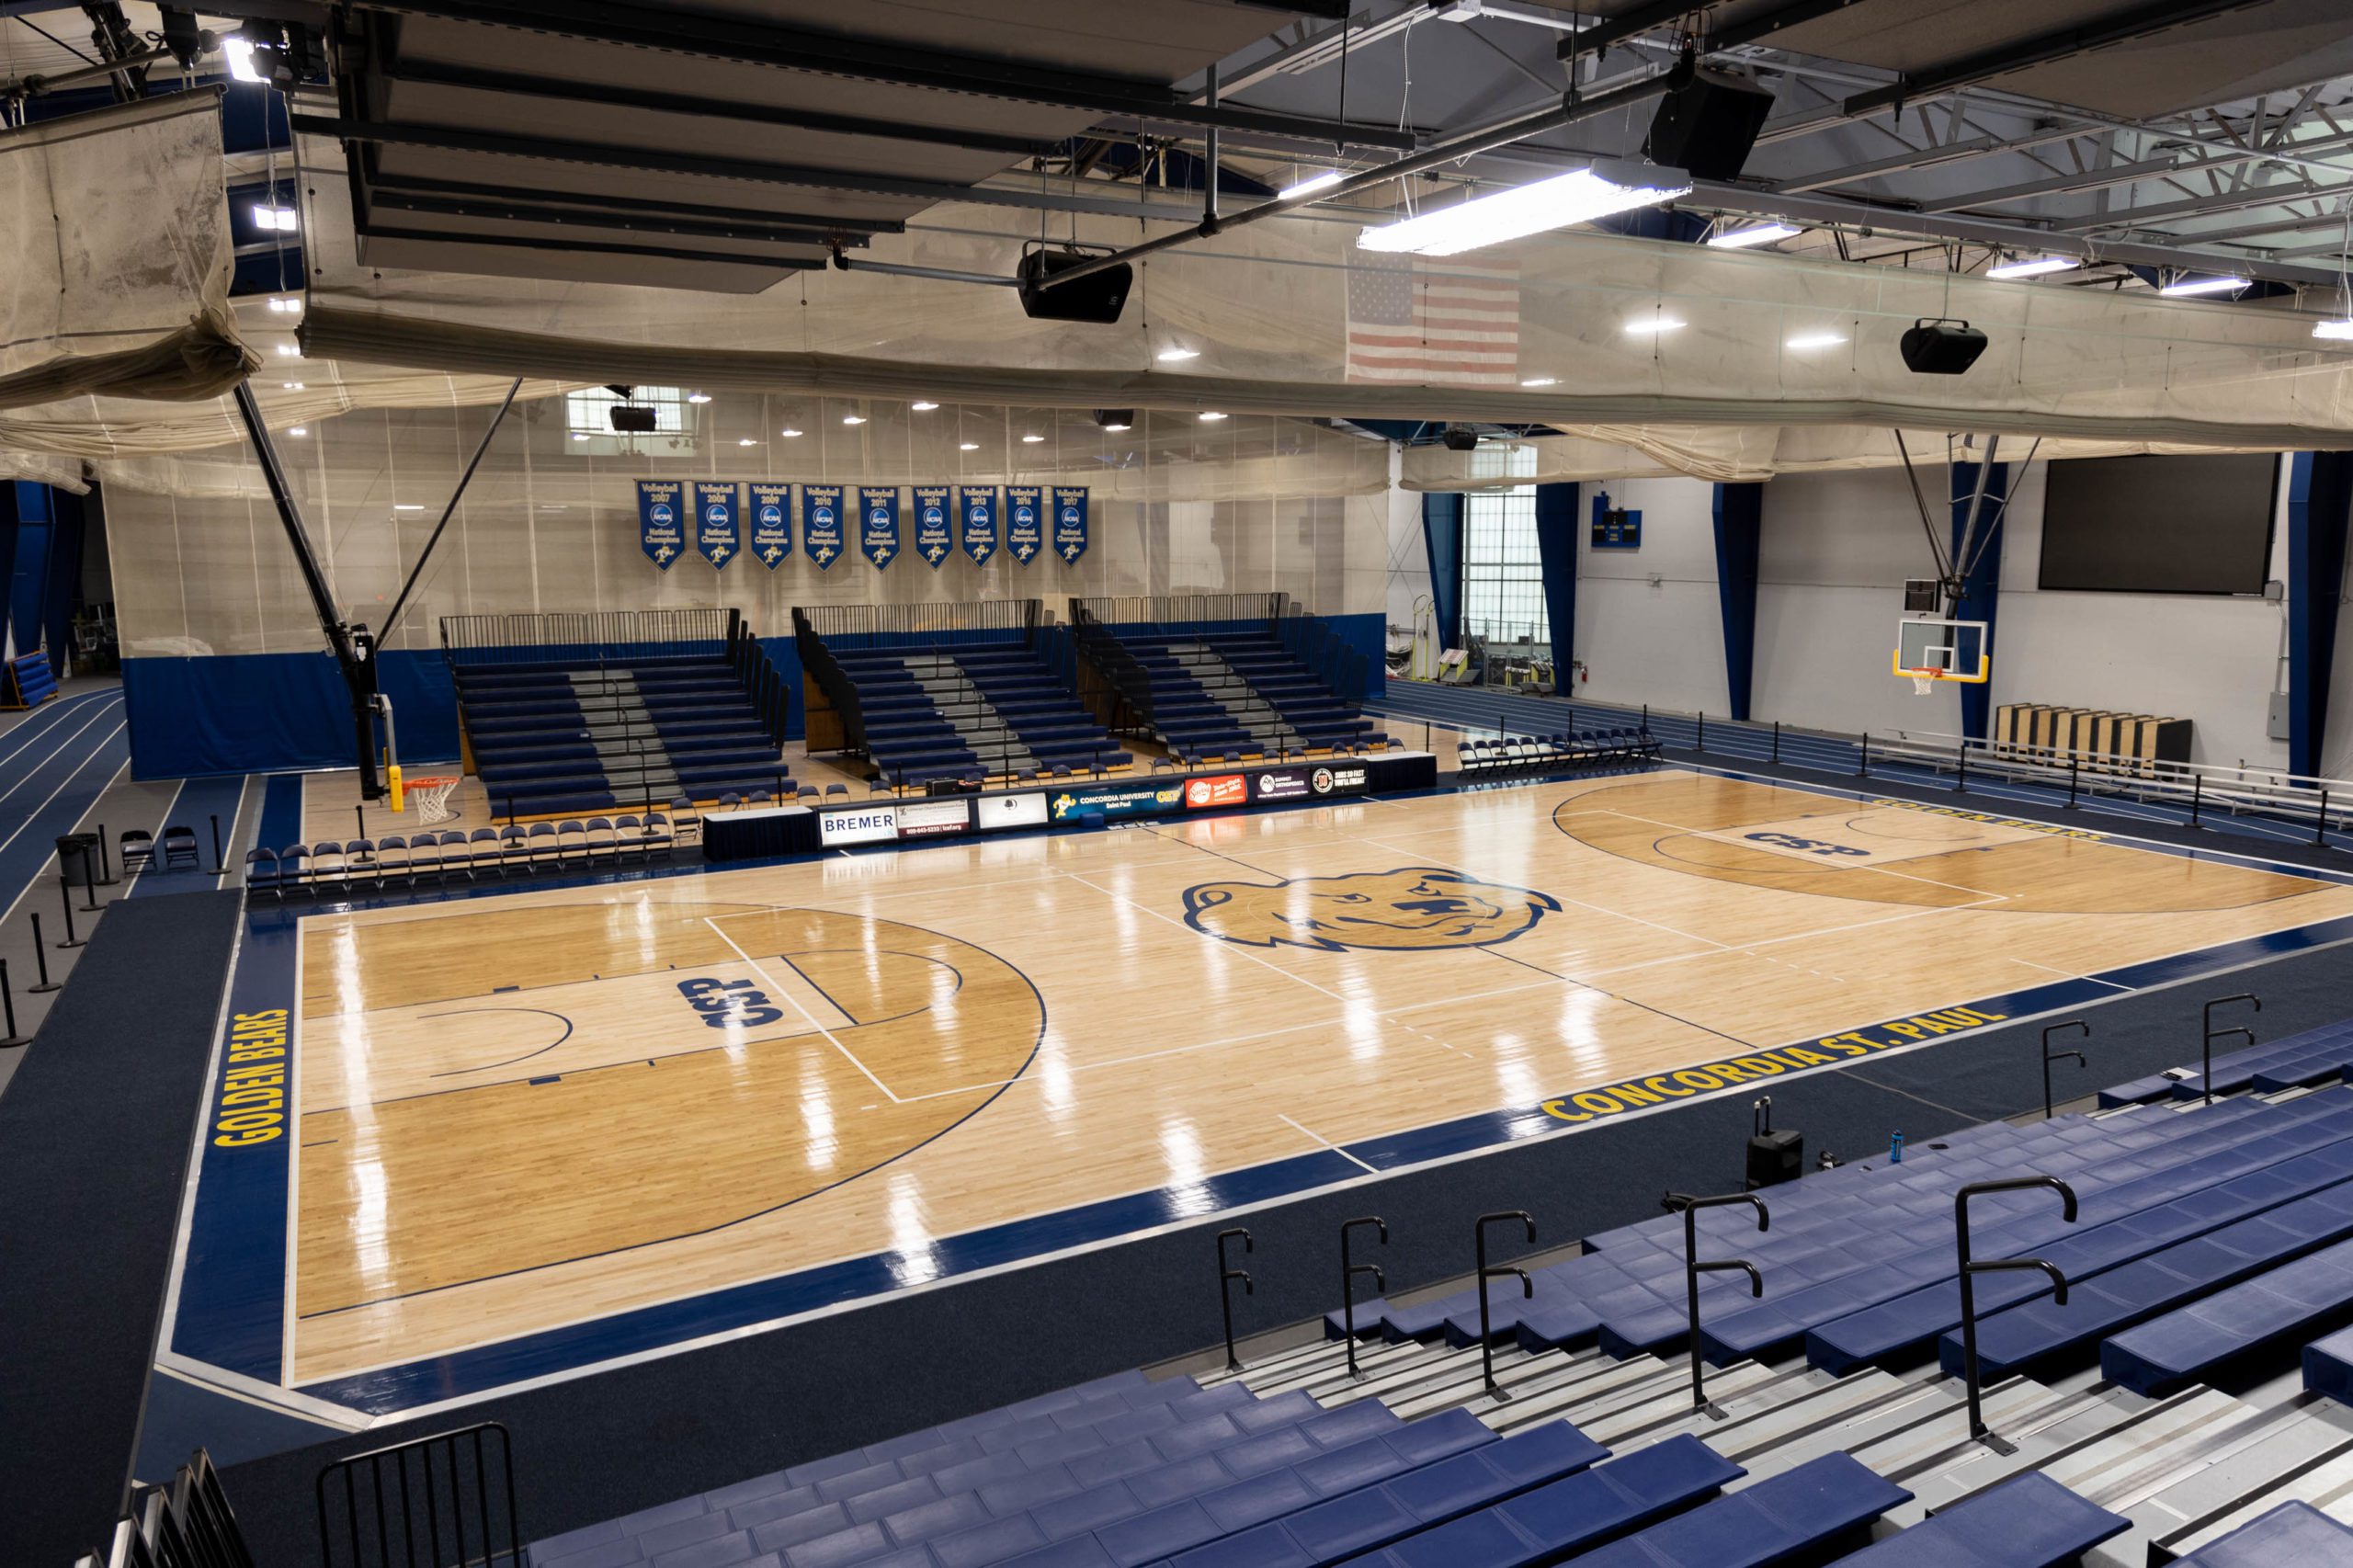 Basketball court with blue and silver bleachers next to it